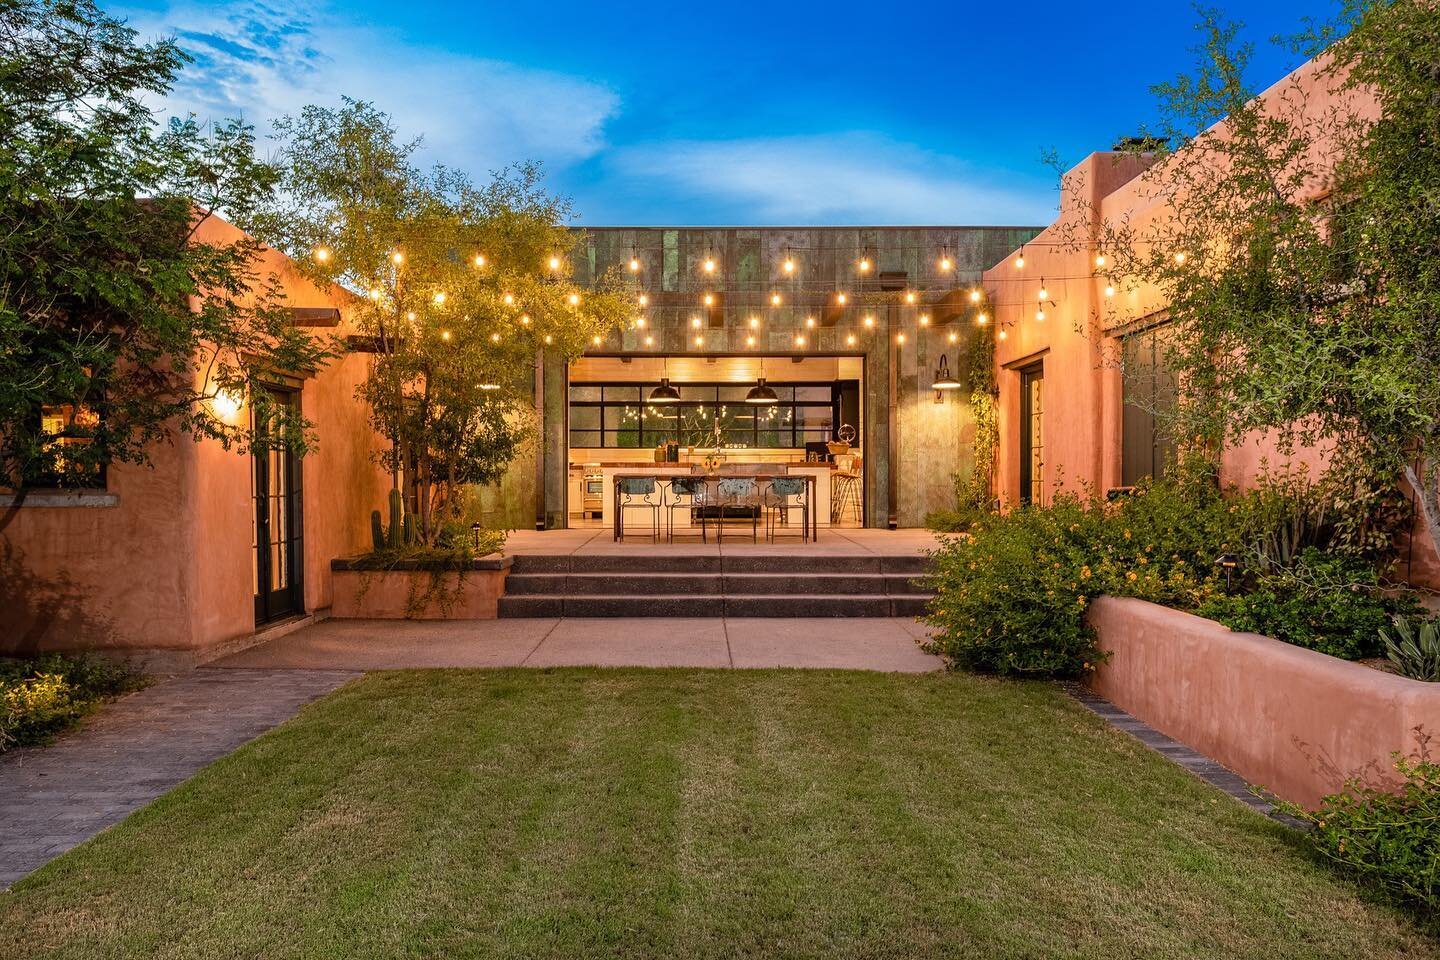 This original 1928 adobe was originally 3 little casitas. We added a new, more #contemporary  kitchen, clad in repurposed copper panels that connects two of the three original structures to  create a larger main house, more in tune with the neighborh